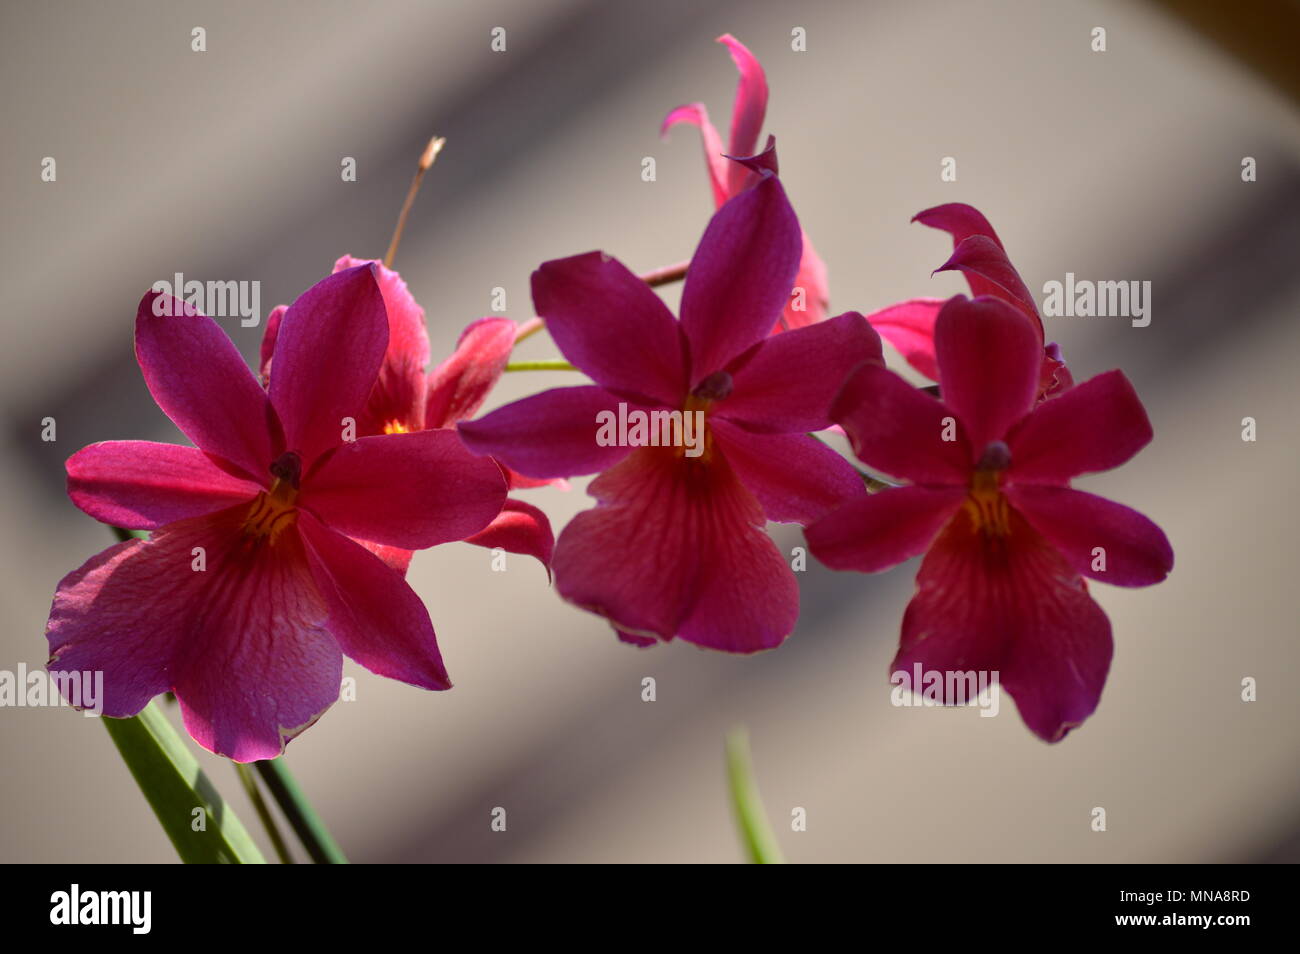 Orchid Dendrobium Berry Oda Pink Red Photograph Of A Stick Replete With Various Flowers. Nature Orchid Botanical Biology Phytology Flowers Plants. May Stock Photo